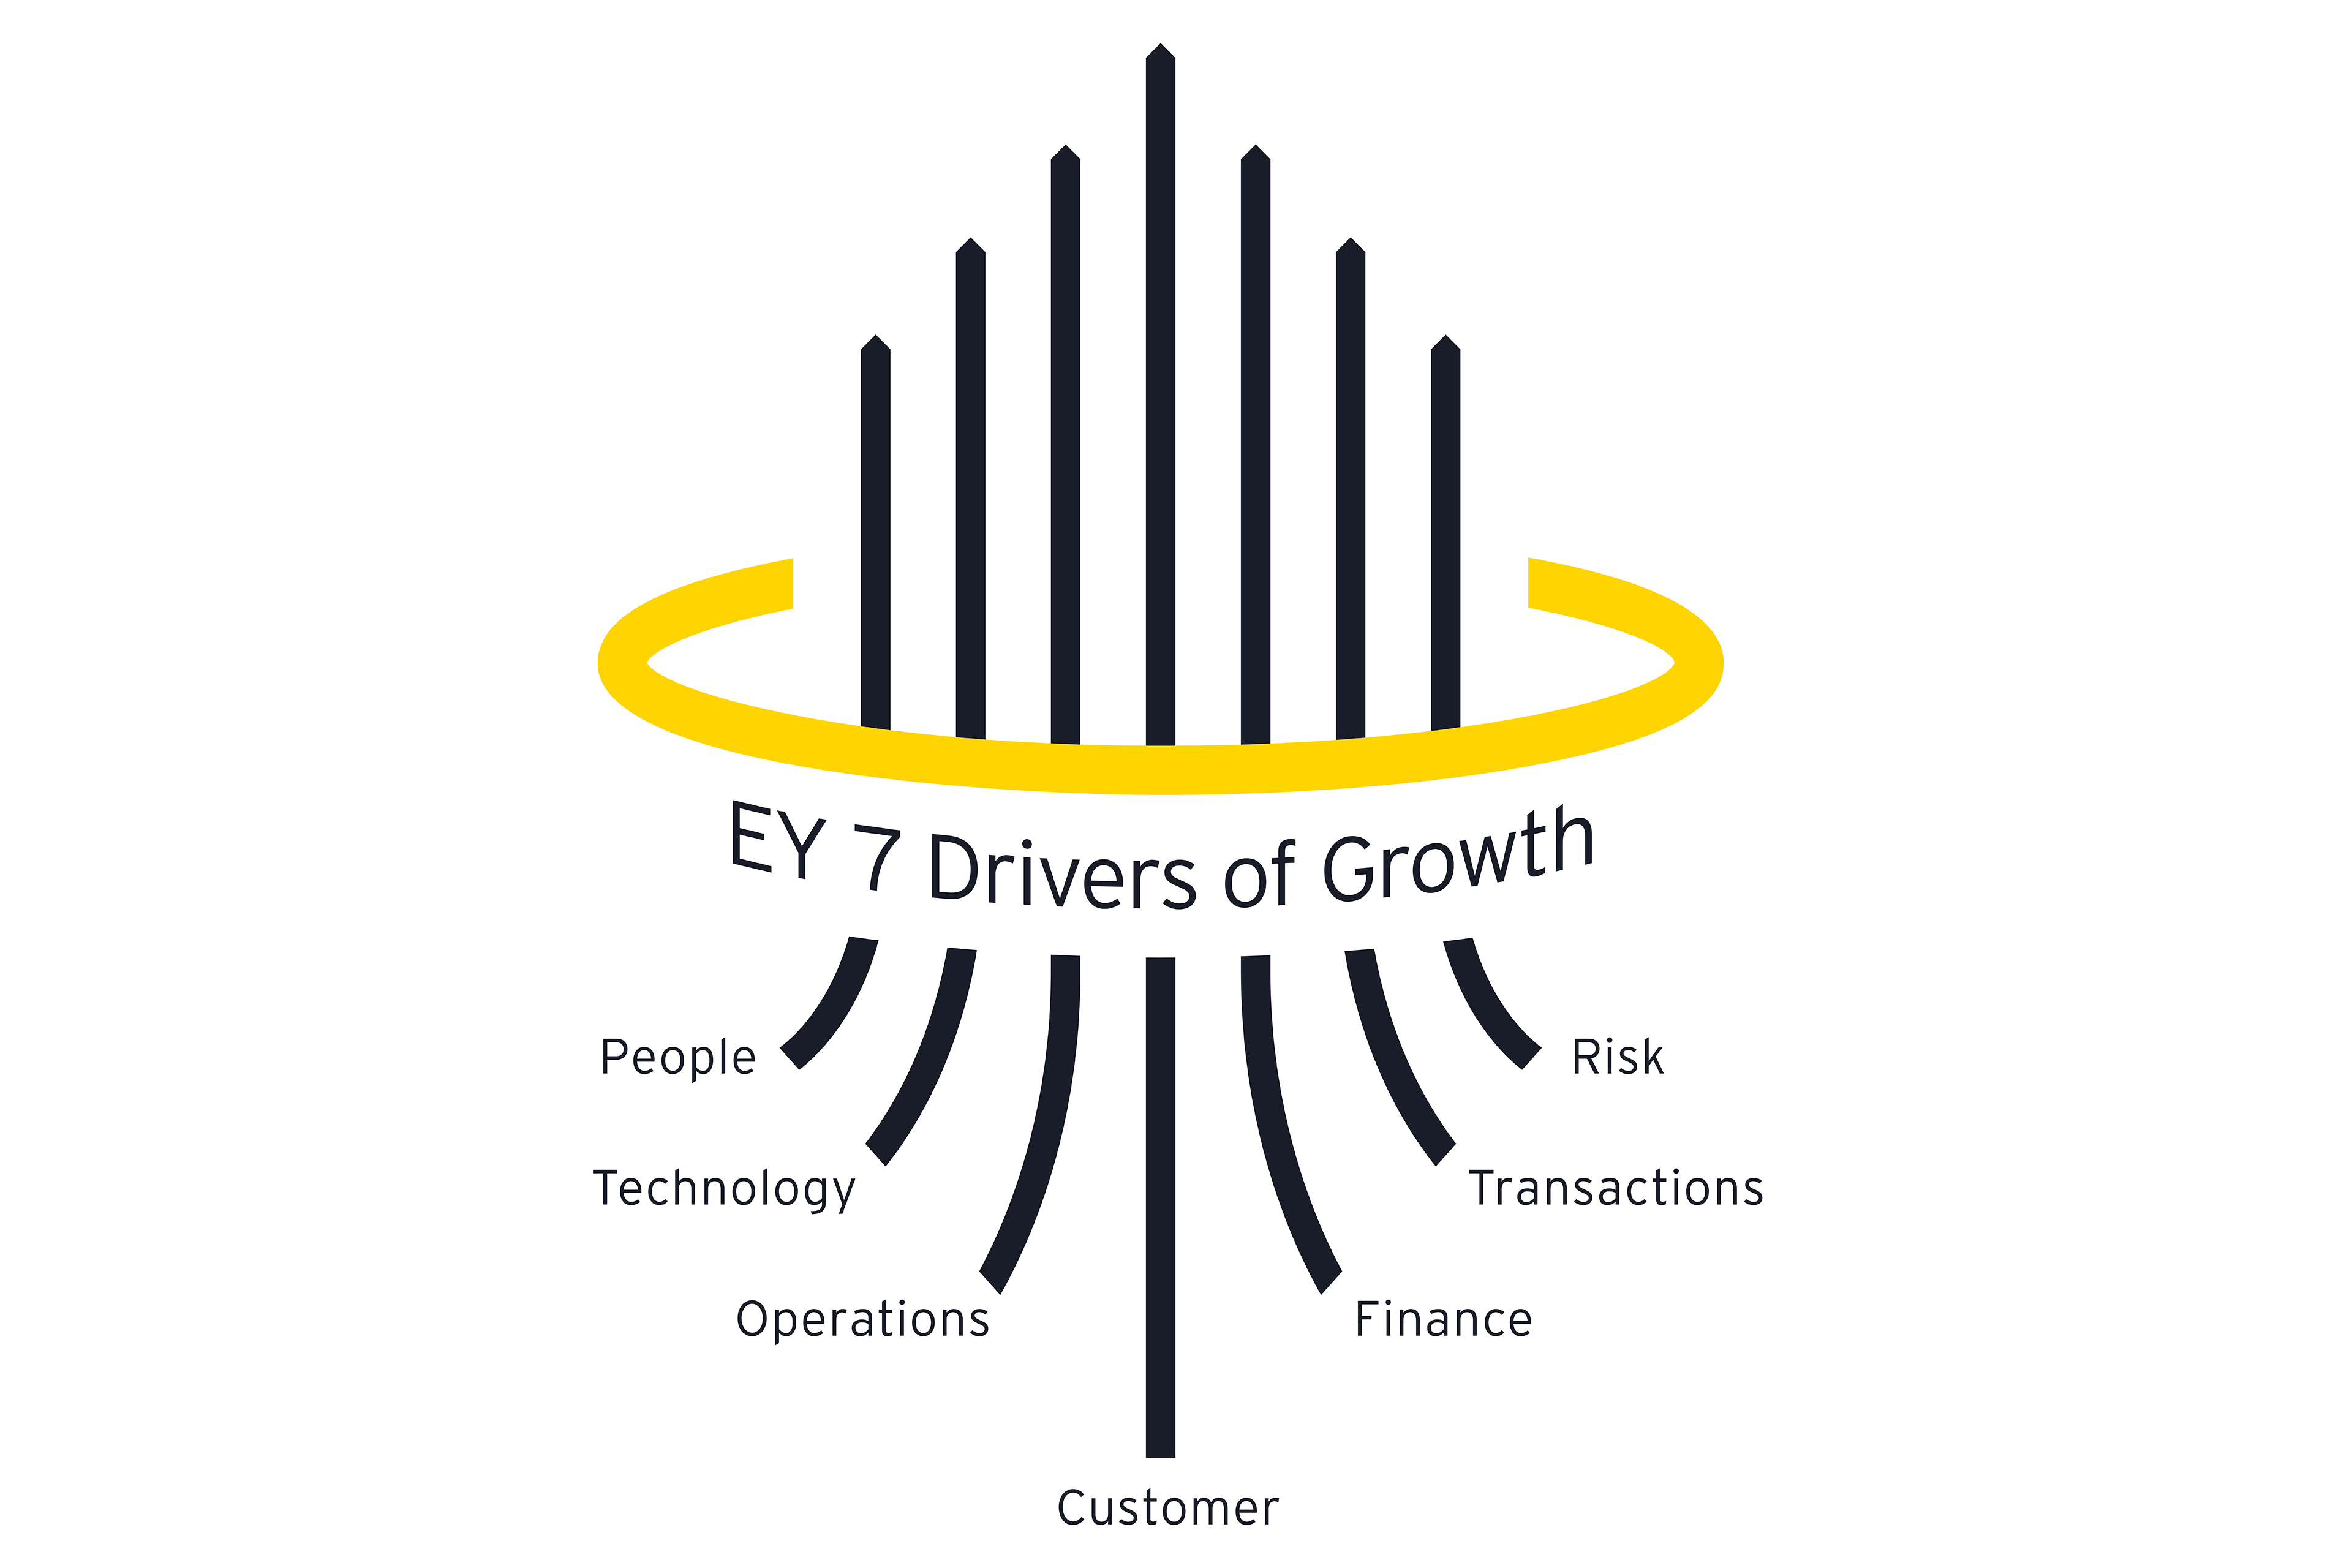 ey-seven-drivers-of-growth-full-size